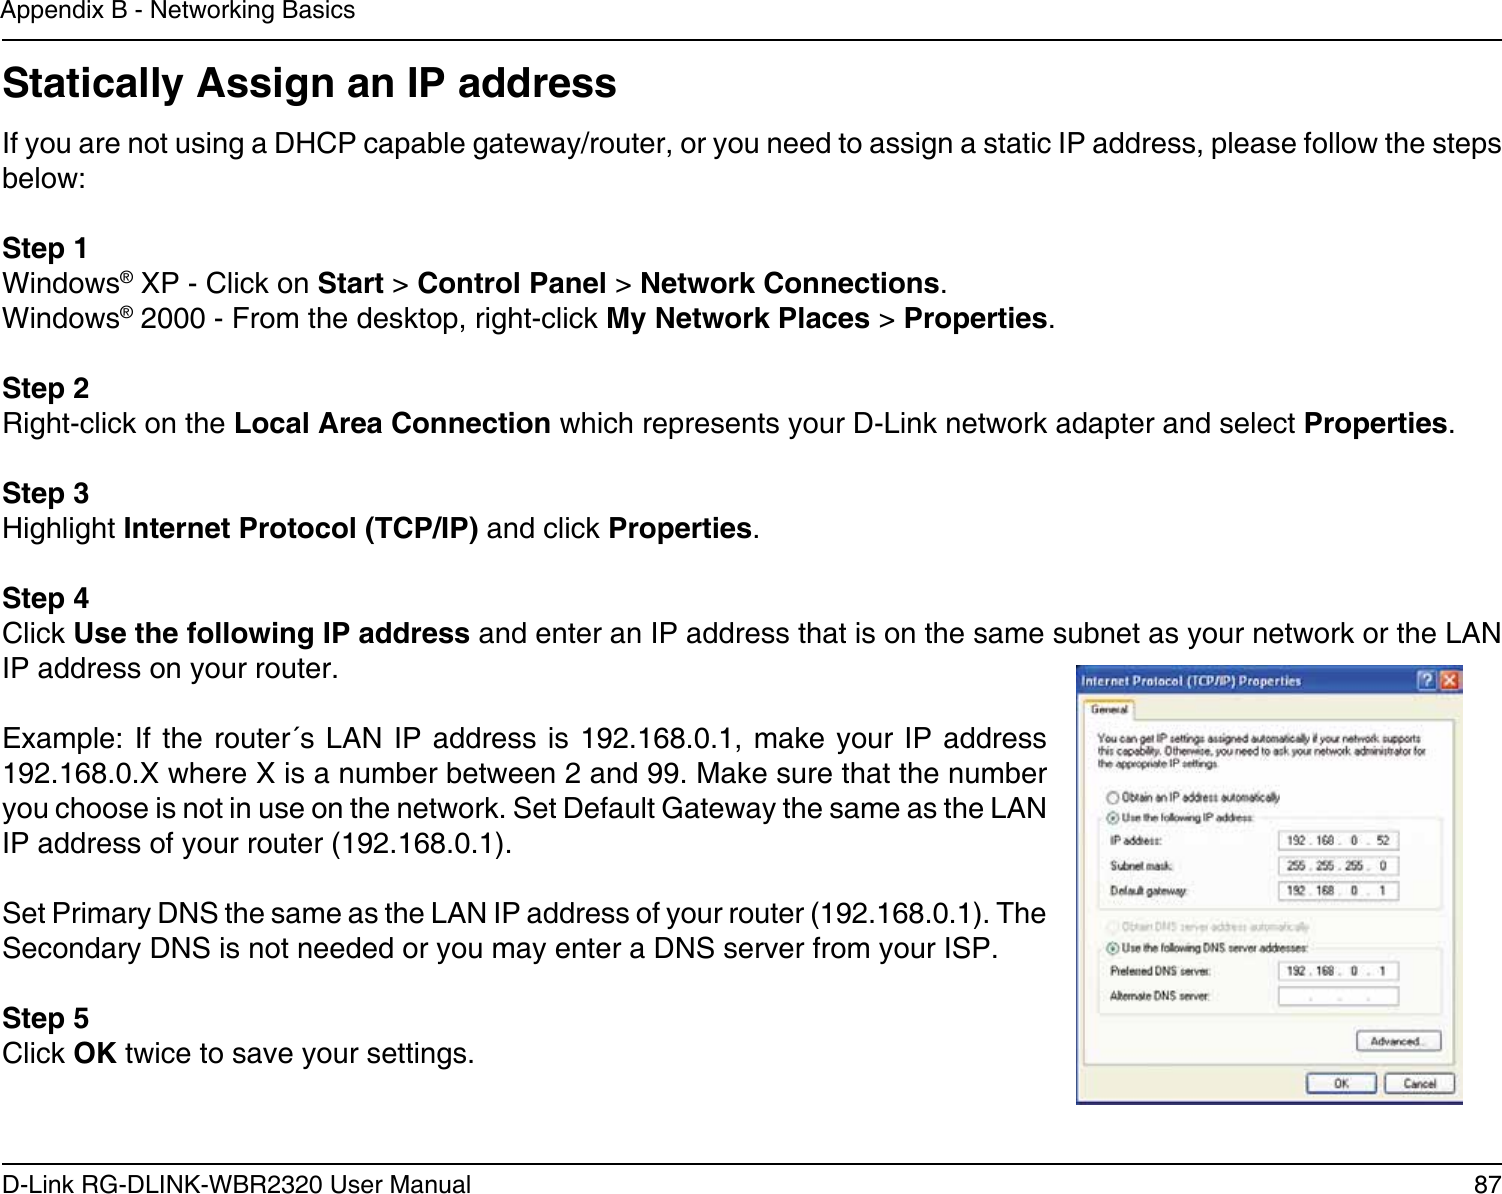 87D-Link RG-DLINK-WBR2320 User ManualAppendix B - Networking BasicsStatically Assign an IP addressIf you are not using a DHCP capable gateway/router, or you need to assign a static IP address, please follow the steps below:Step 1Windows® XP - Click on Start &gt; Control Panel &gt; Network Connections.Windows® 2000 - From the desktop, right-click My Network Places &gt; Properties.Step 2Right-click on the Local Area Connection which represents your D-Link network adapter and select Properties.Step 3Highlight Internet Protocol (TCP/IP) and click Properties.Step 4Click Use the following IP address and enter an IP address that is on the same subnet as your network or the LAN IP address on your router. Example: If the router´s LAN  IP  address is  192.168.0.1, make your IP address 192.168.0.X where X is a number between 2 and 99. Make sure that the number you choose is not in use on the network. Set Default Gateway the same as the LAN IP address of your router (192.168.0.1). Set Primary DNS the same as the LAN IP address of your router (192.168.0.1). The Secondary DNS is not needed or you may enter a DNS server from your ISP.Step 5Click OK twice to save your settings.